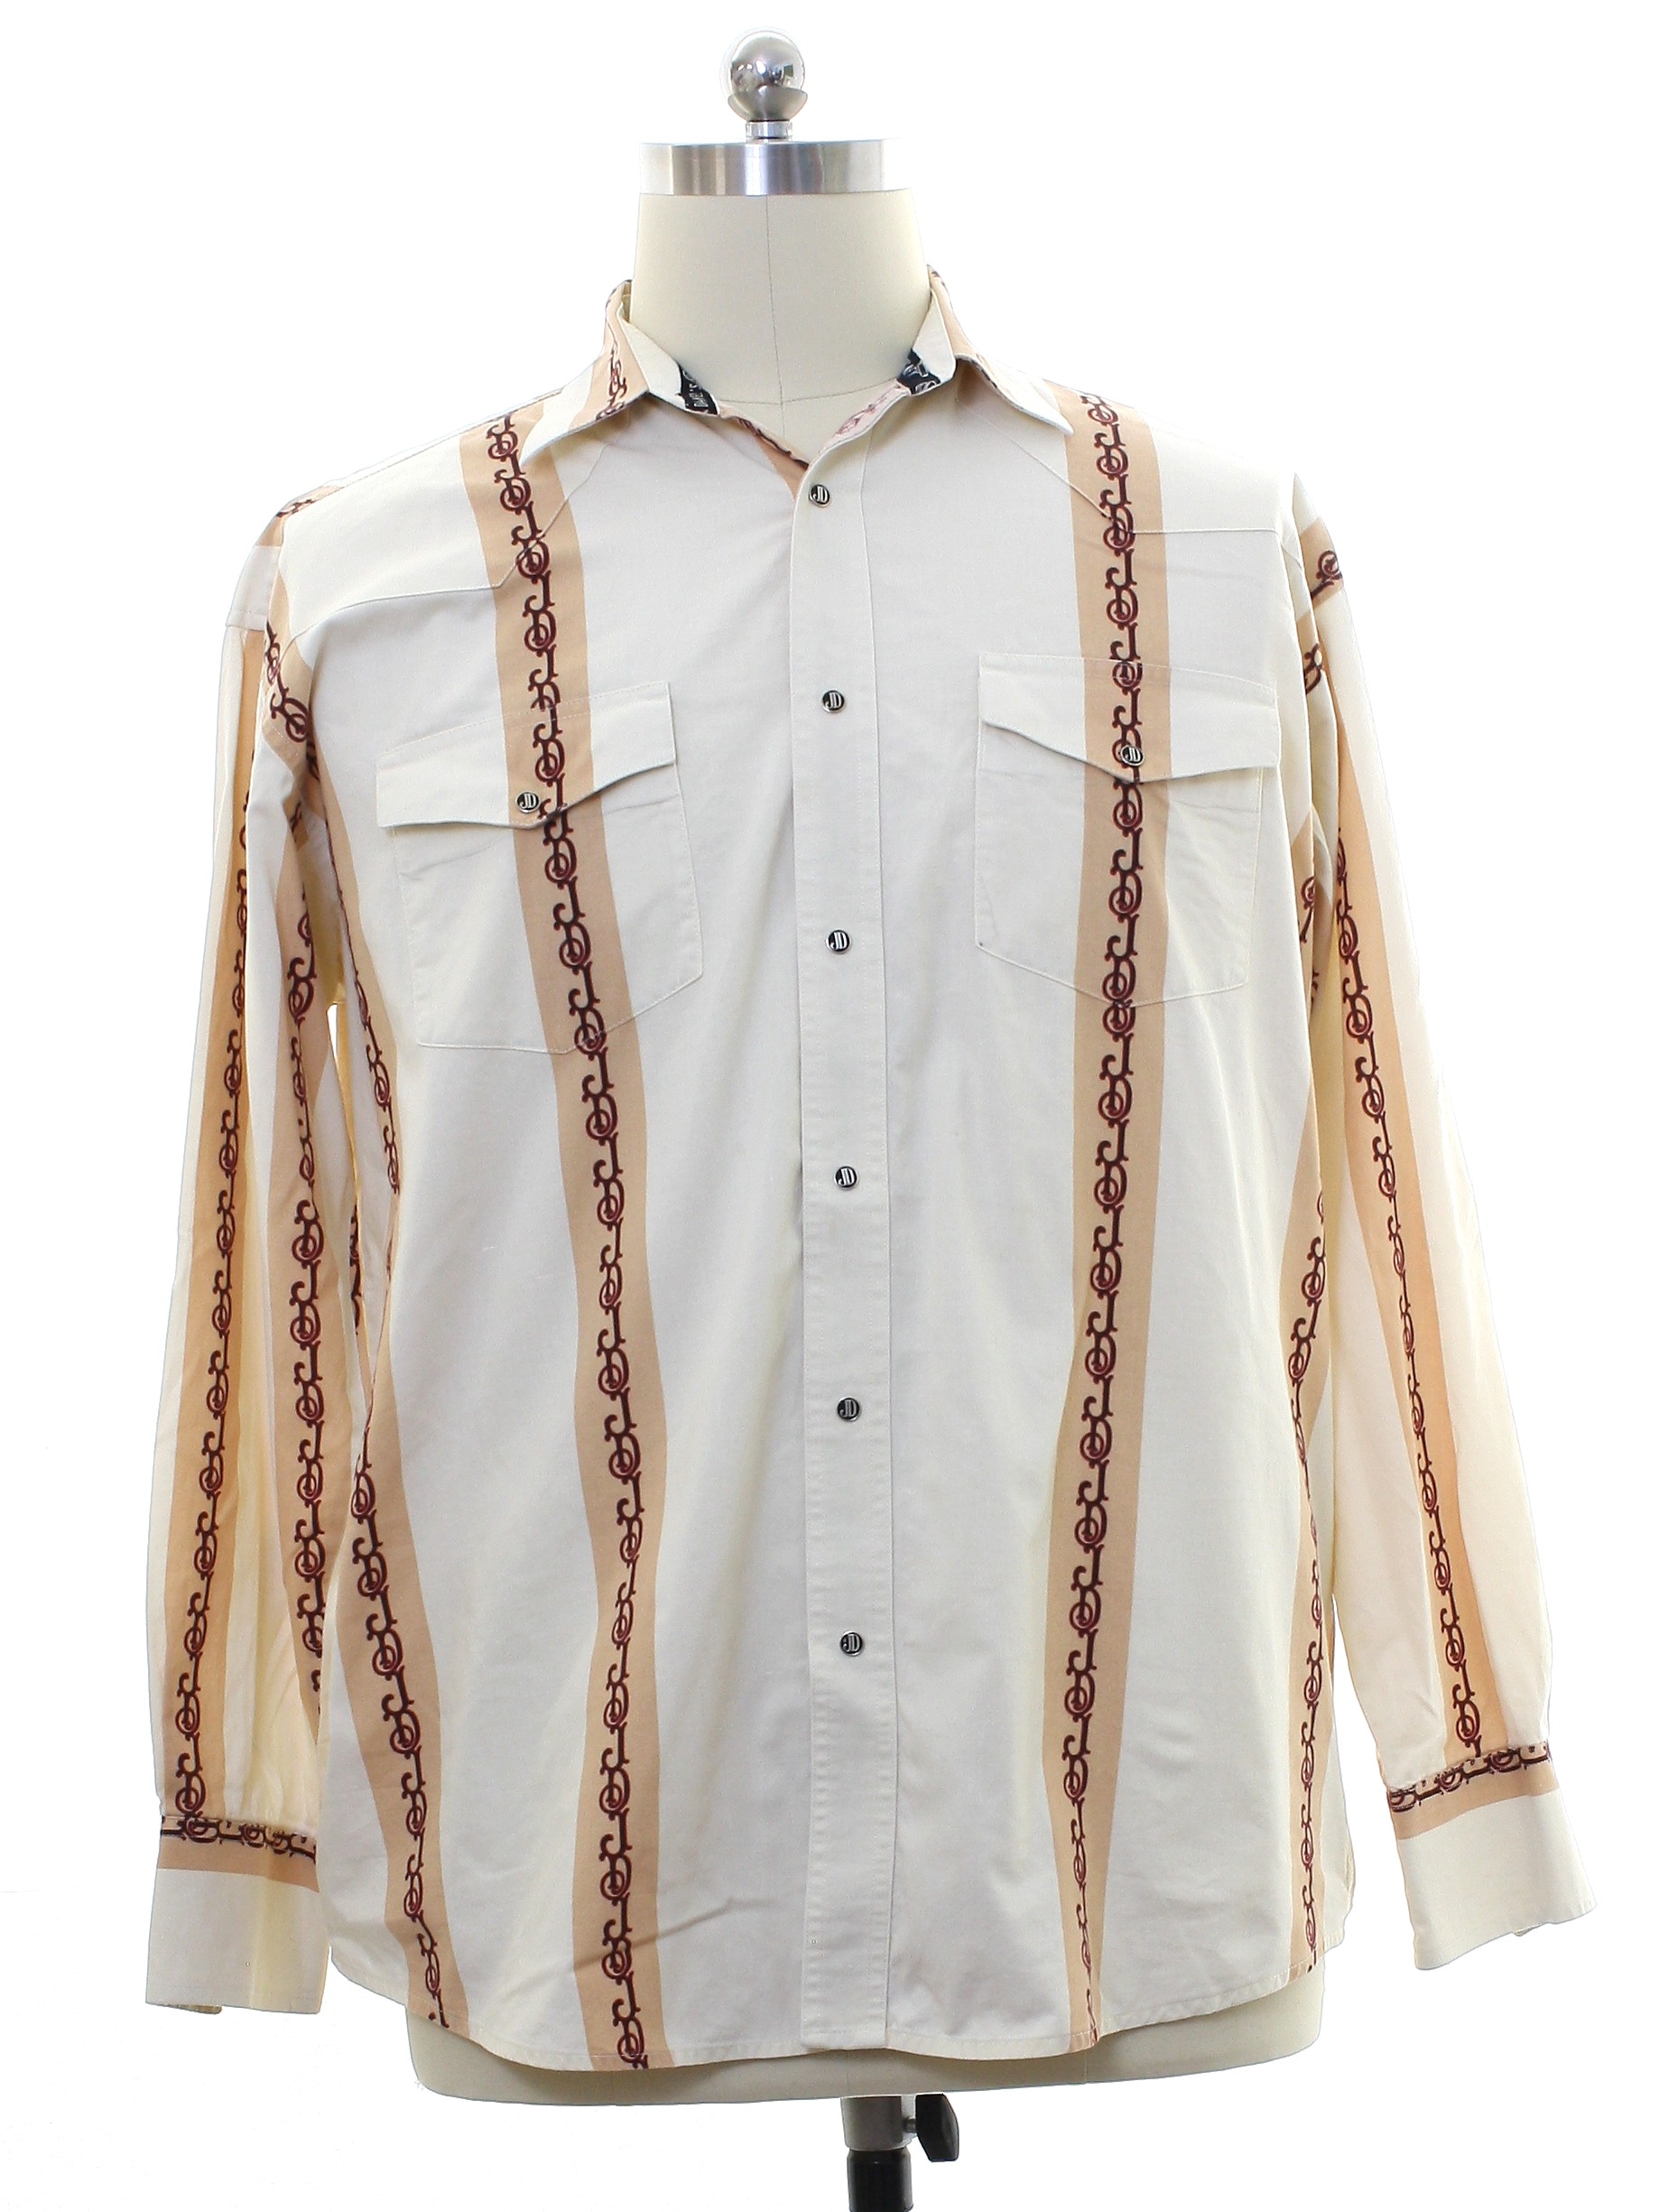 Western Shirt: 90s -Jack Daniels- Mens Cream background polyester cotton  blend longsleeve western shirt. pearlized snaps at front placket and cuffs.  Vertical stripes in tan brown with the letters JD in red